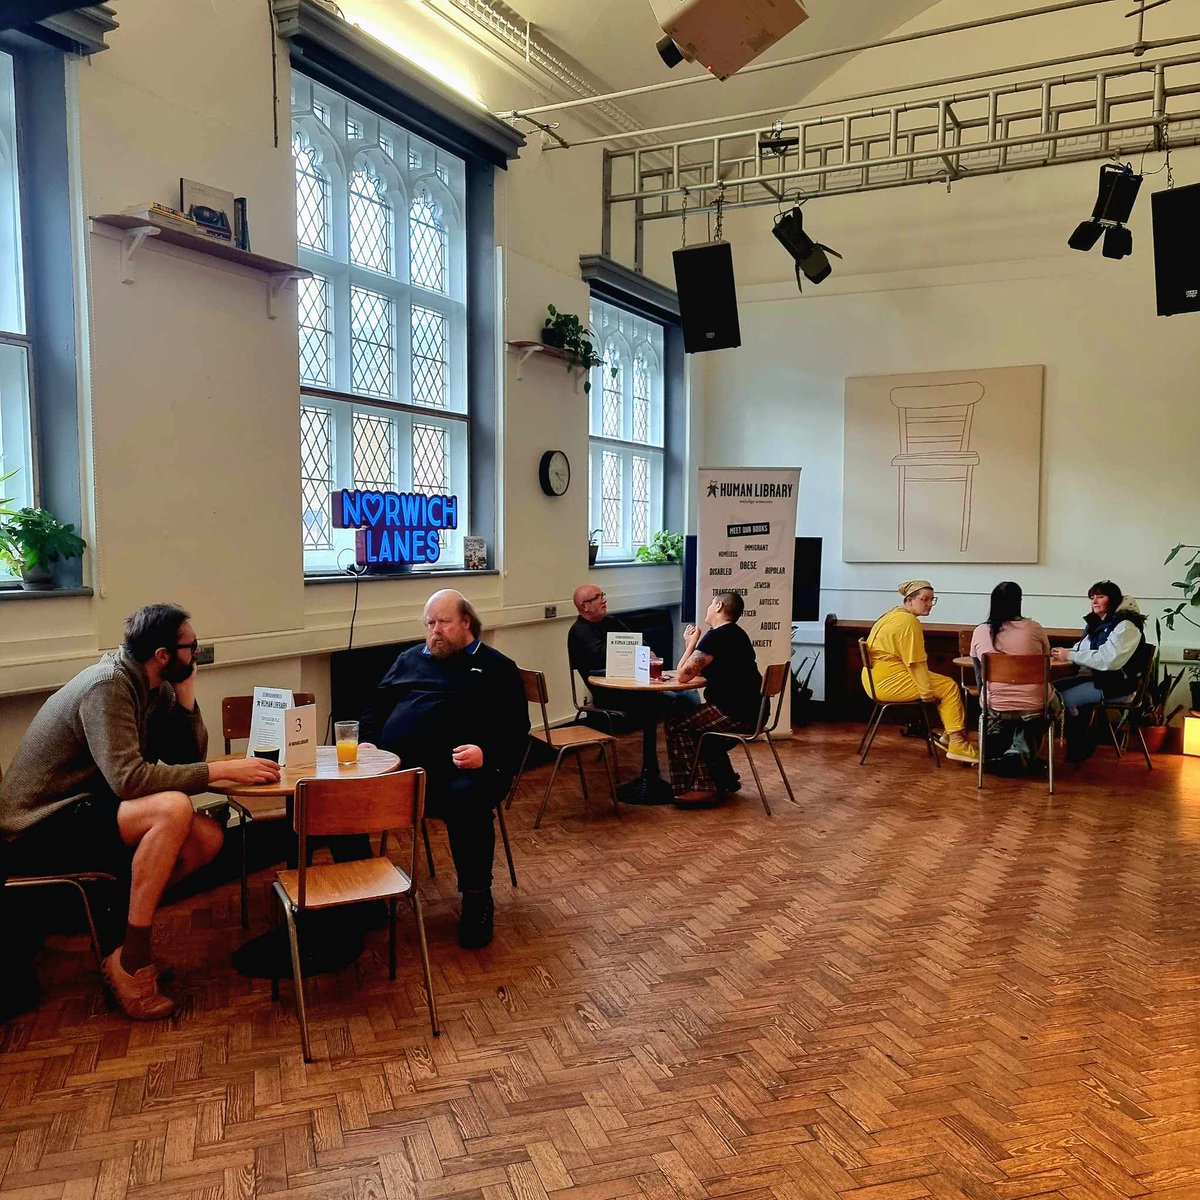 Thank you to our amazing books and readers for joining the Human Library Book Cafe hosted in partnership with @NorwichArtCentr yesterday. #UnjudgeSomeone #HumanLibrary #NorwichArtsCentre #BookCafe